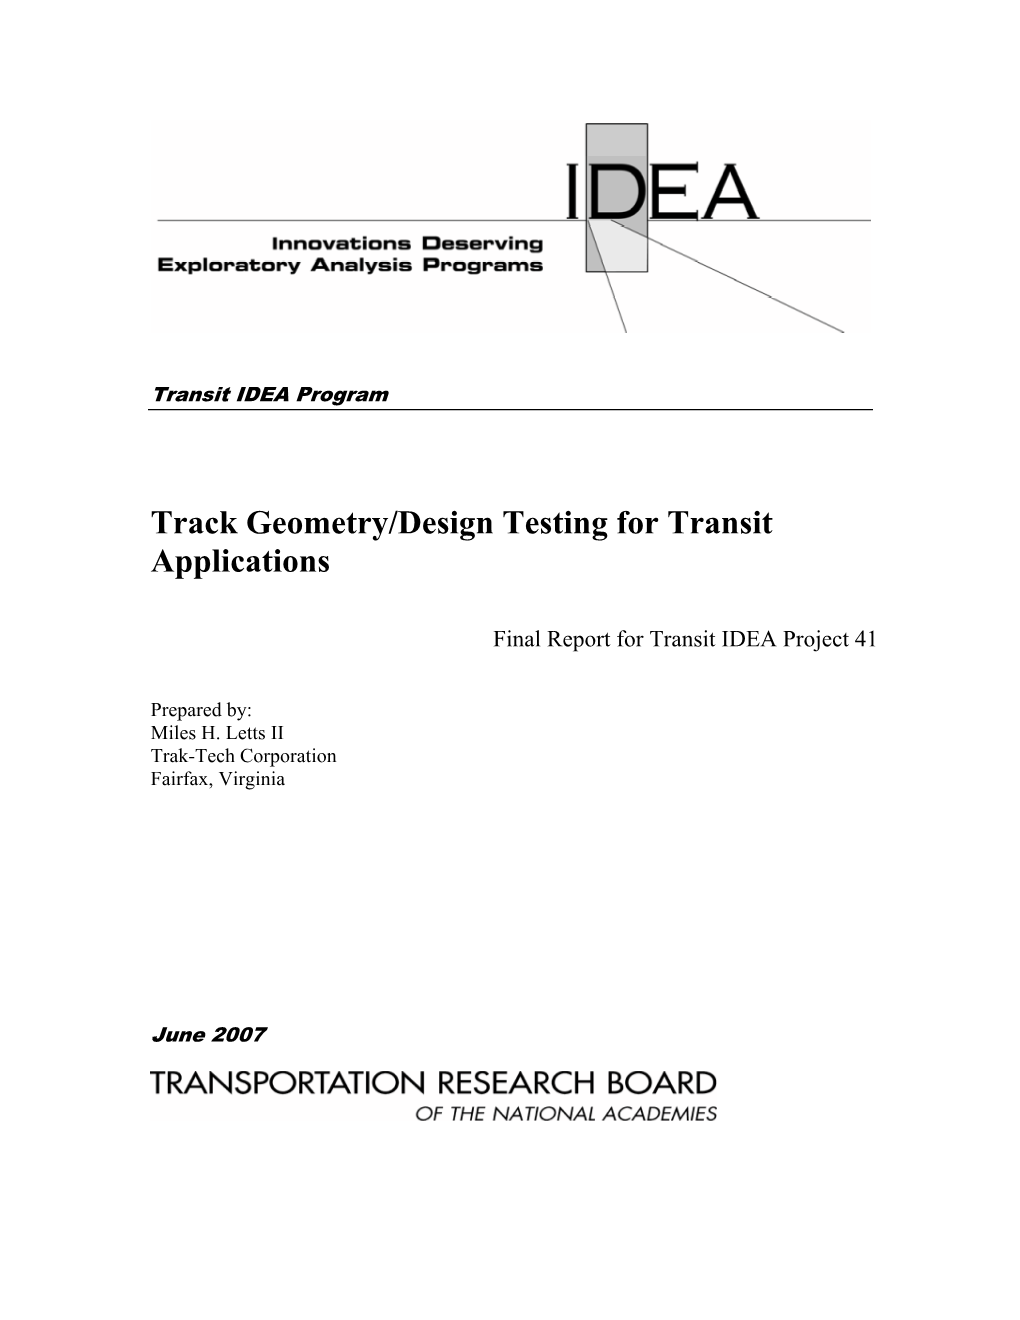 Track Geometry/Design Testing for Transit Applications